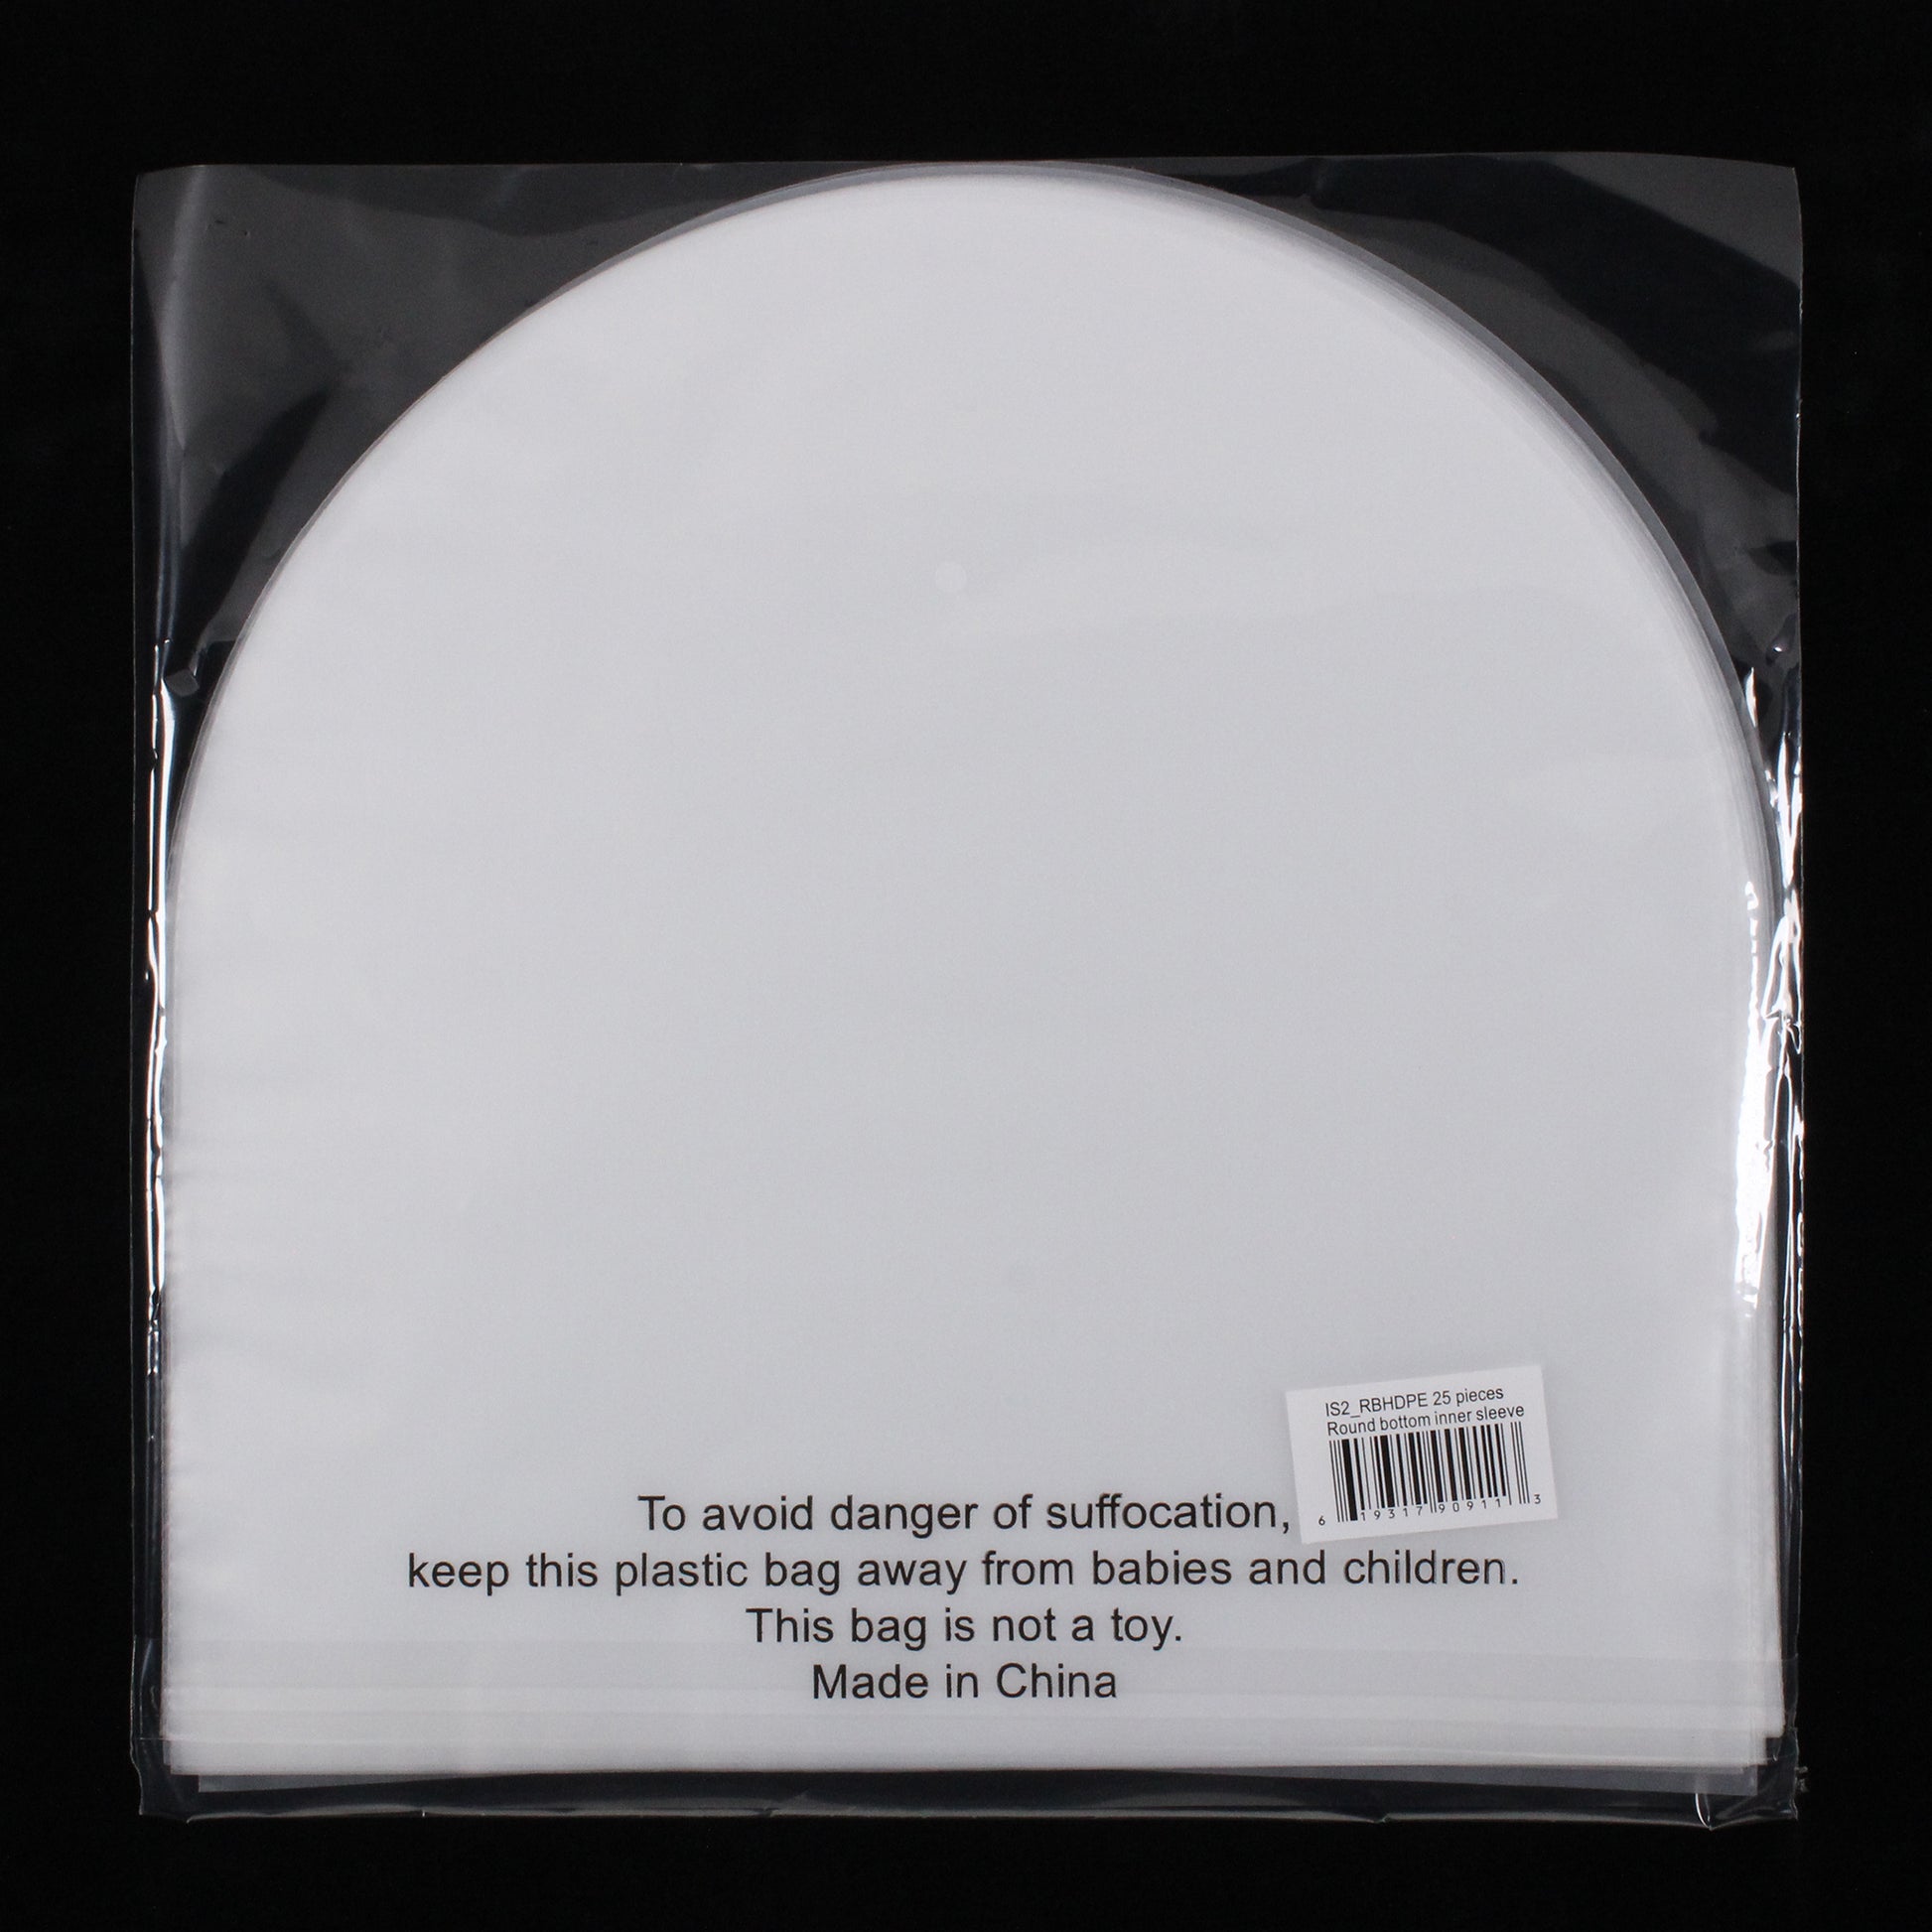 Poly Inner Sleeve for 12 inch Records - Pack of 100